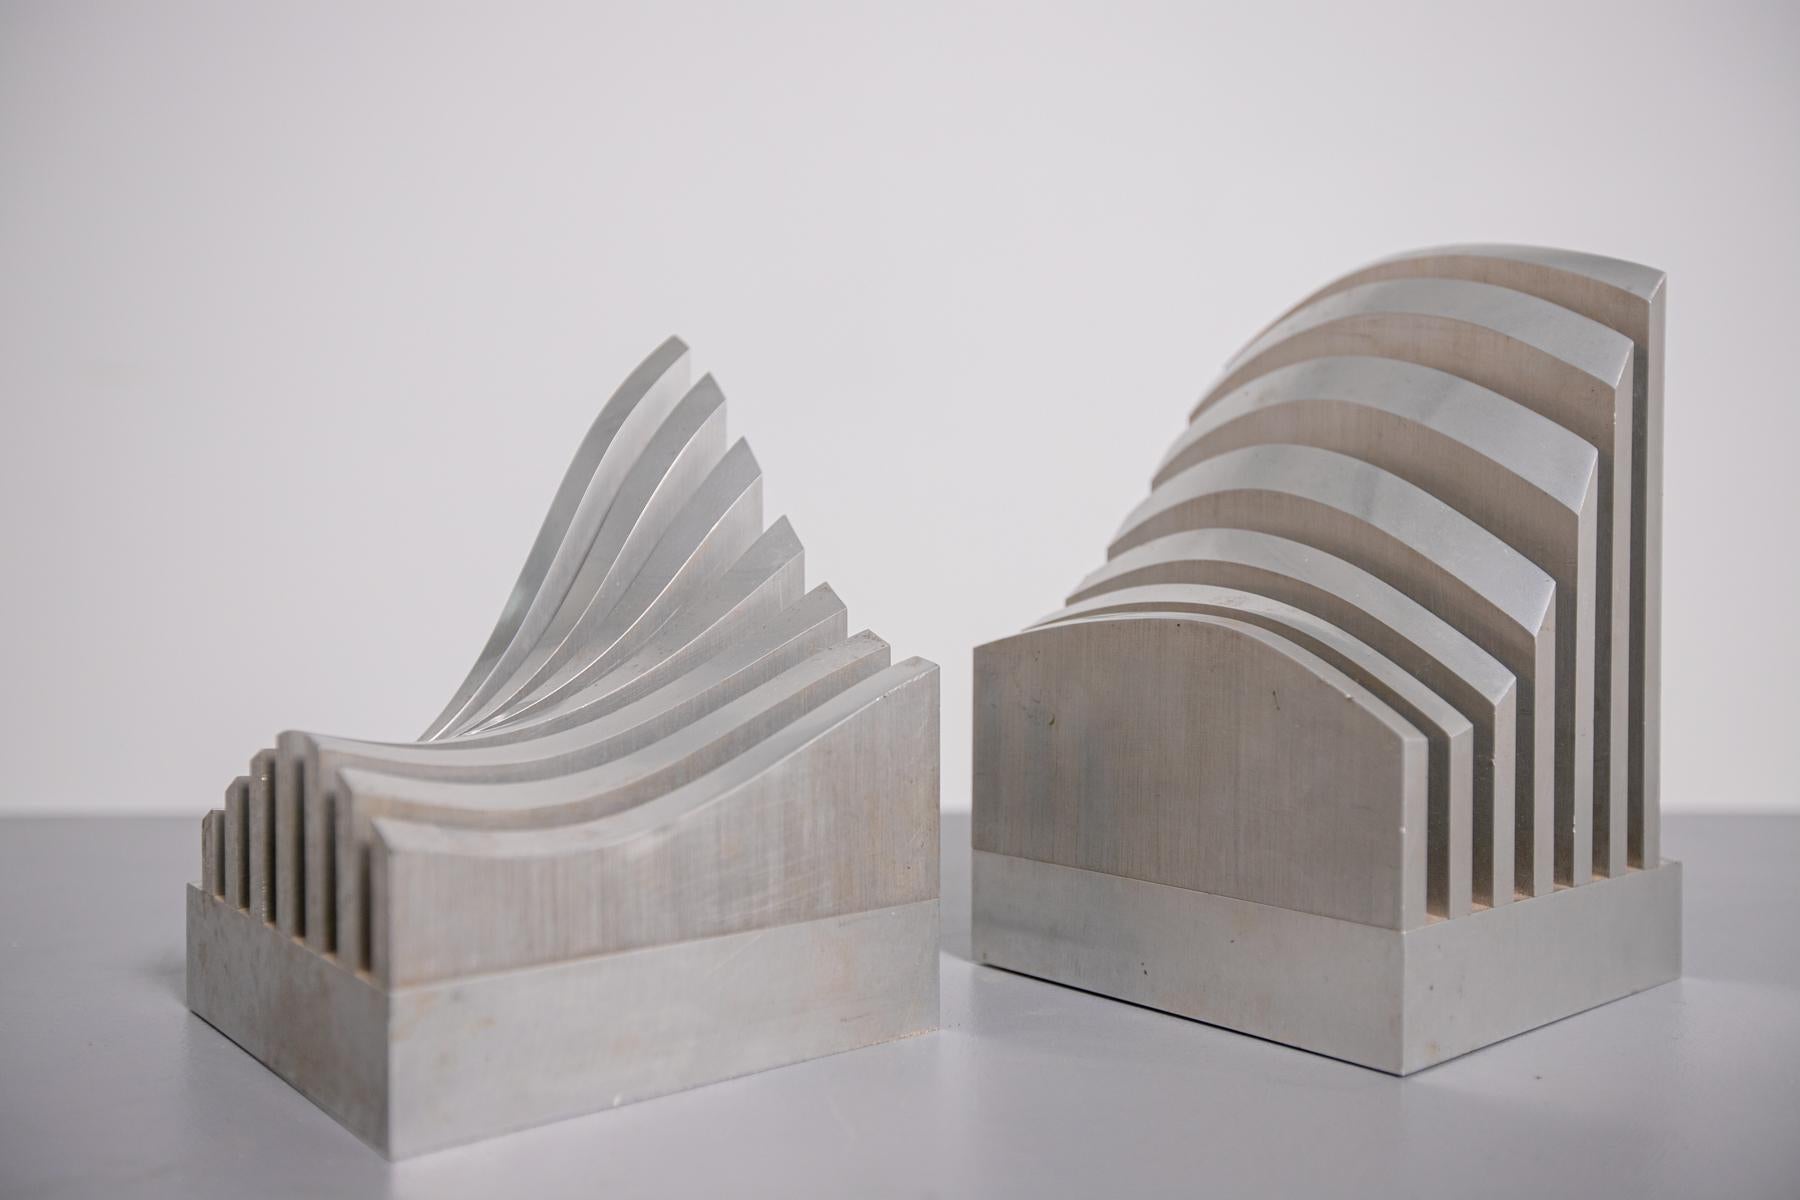 Aluminium and metal sculpture by Jiro Sugawara from the 1970s. The sculpture can be used also as a card holder, or as a book holder. The sculpture is a wave-like landscape with soft and wavy lines. The sculpture is suitable for sideboard and decor.